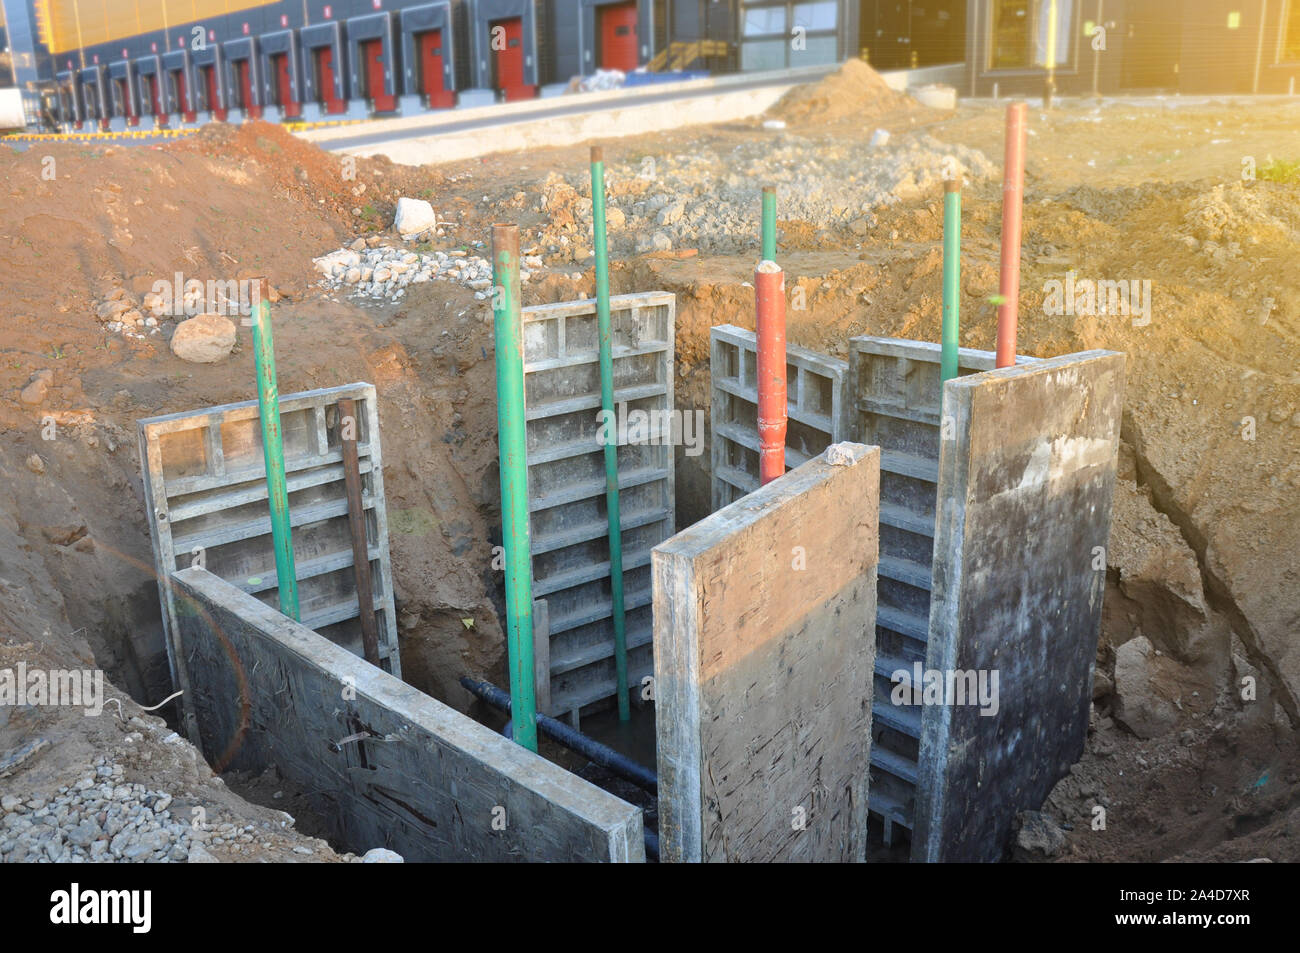 Industrial professional formwork for pouring concrete foundation. Stock Photo